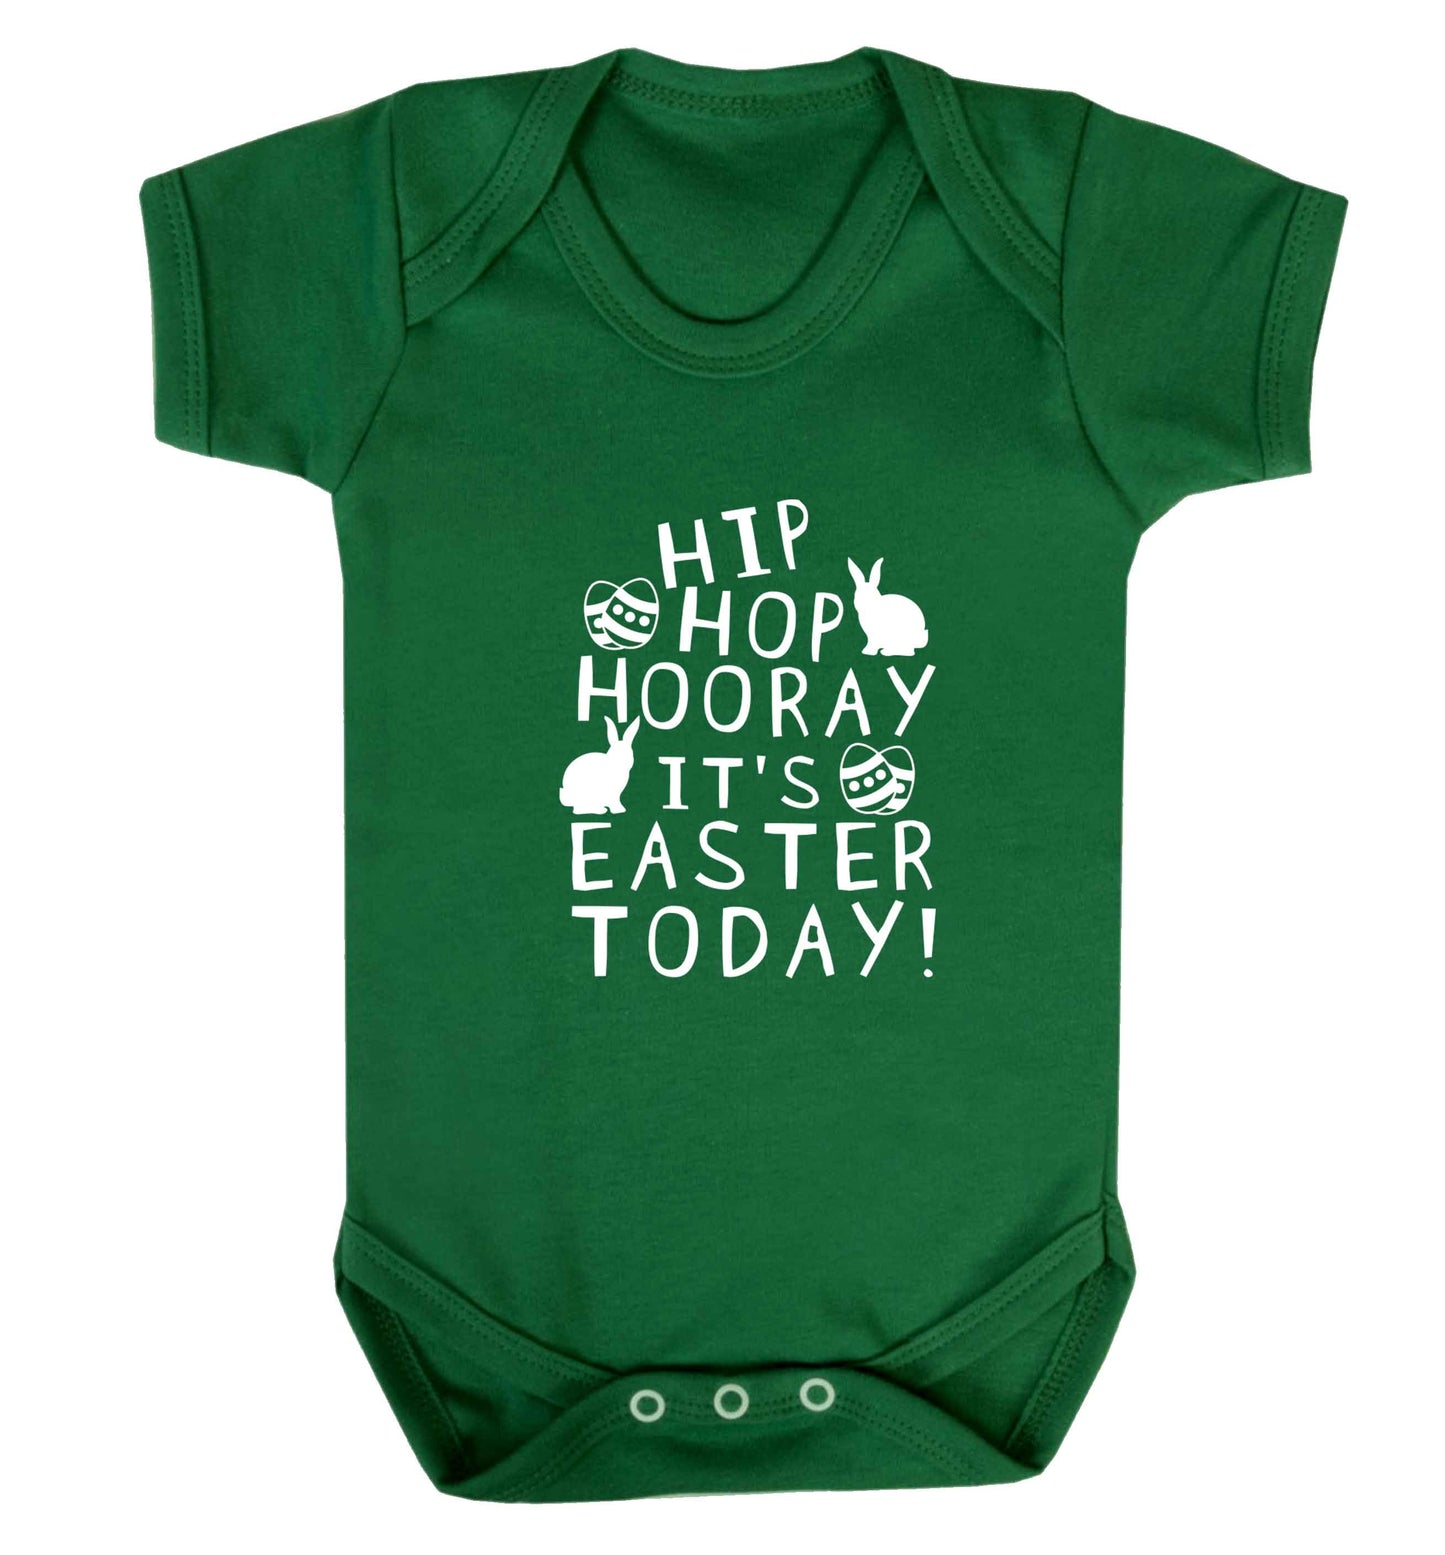 Hip hip hooray it's Easter today! baby vest green 18-24 months